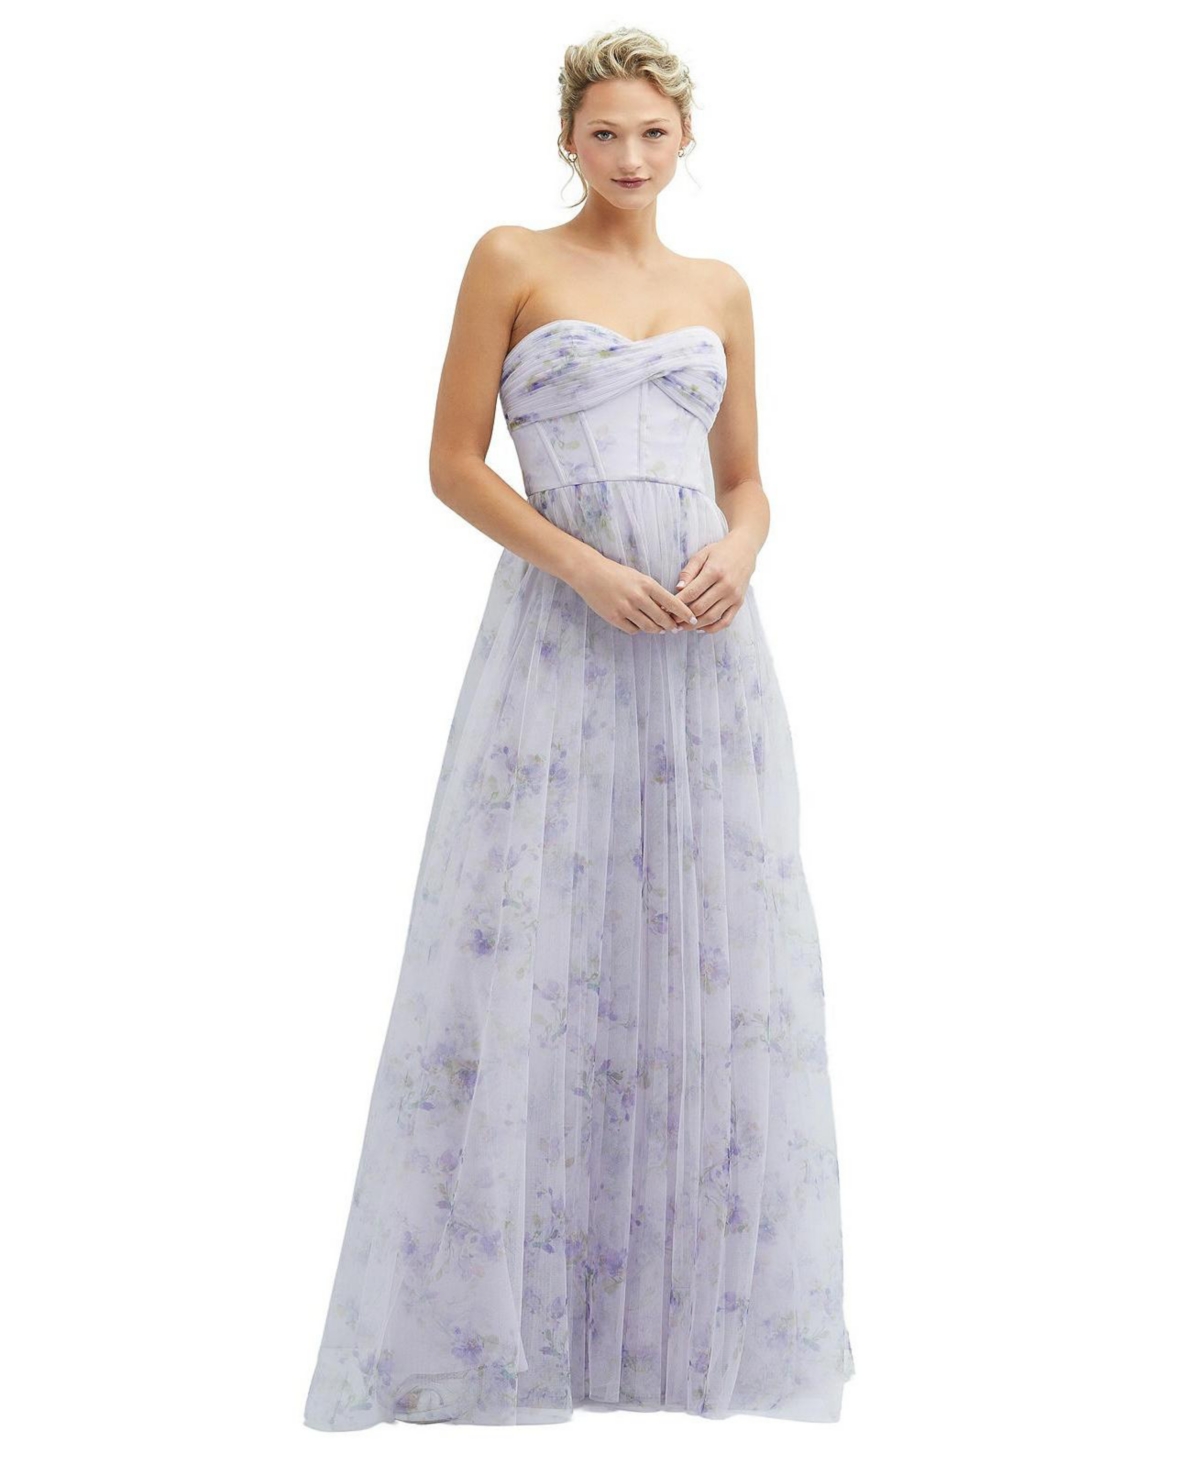 Floral Strapless Twist Cup Corset Tulle Dress with Long Full Skirt - Lilac haze garden